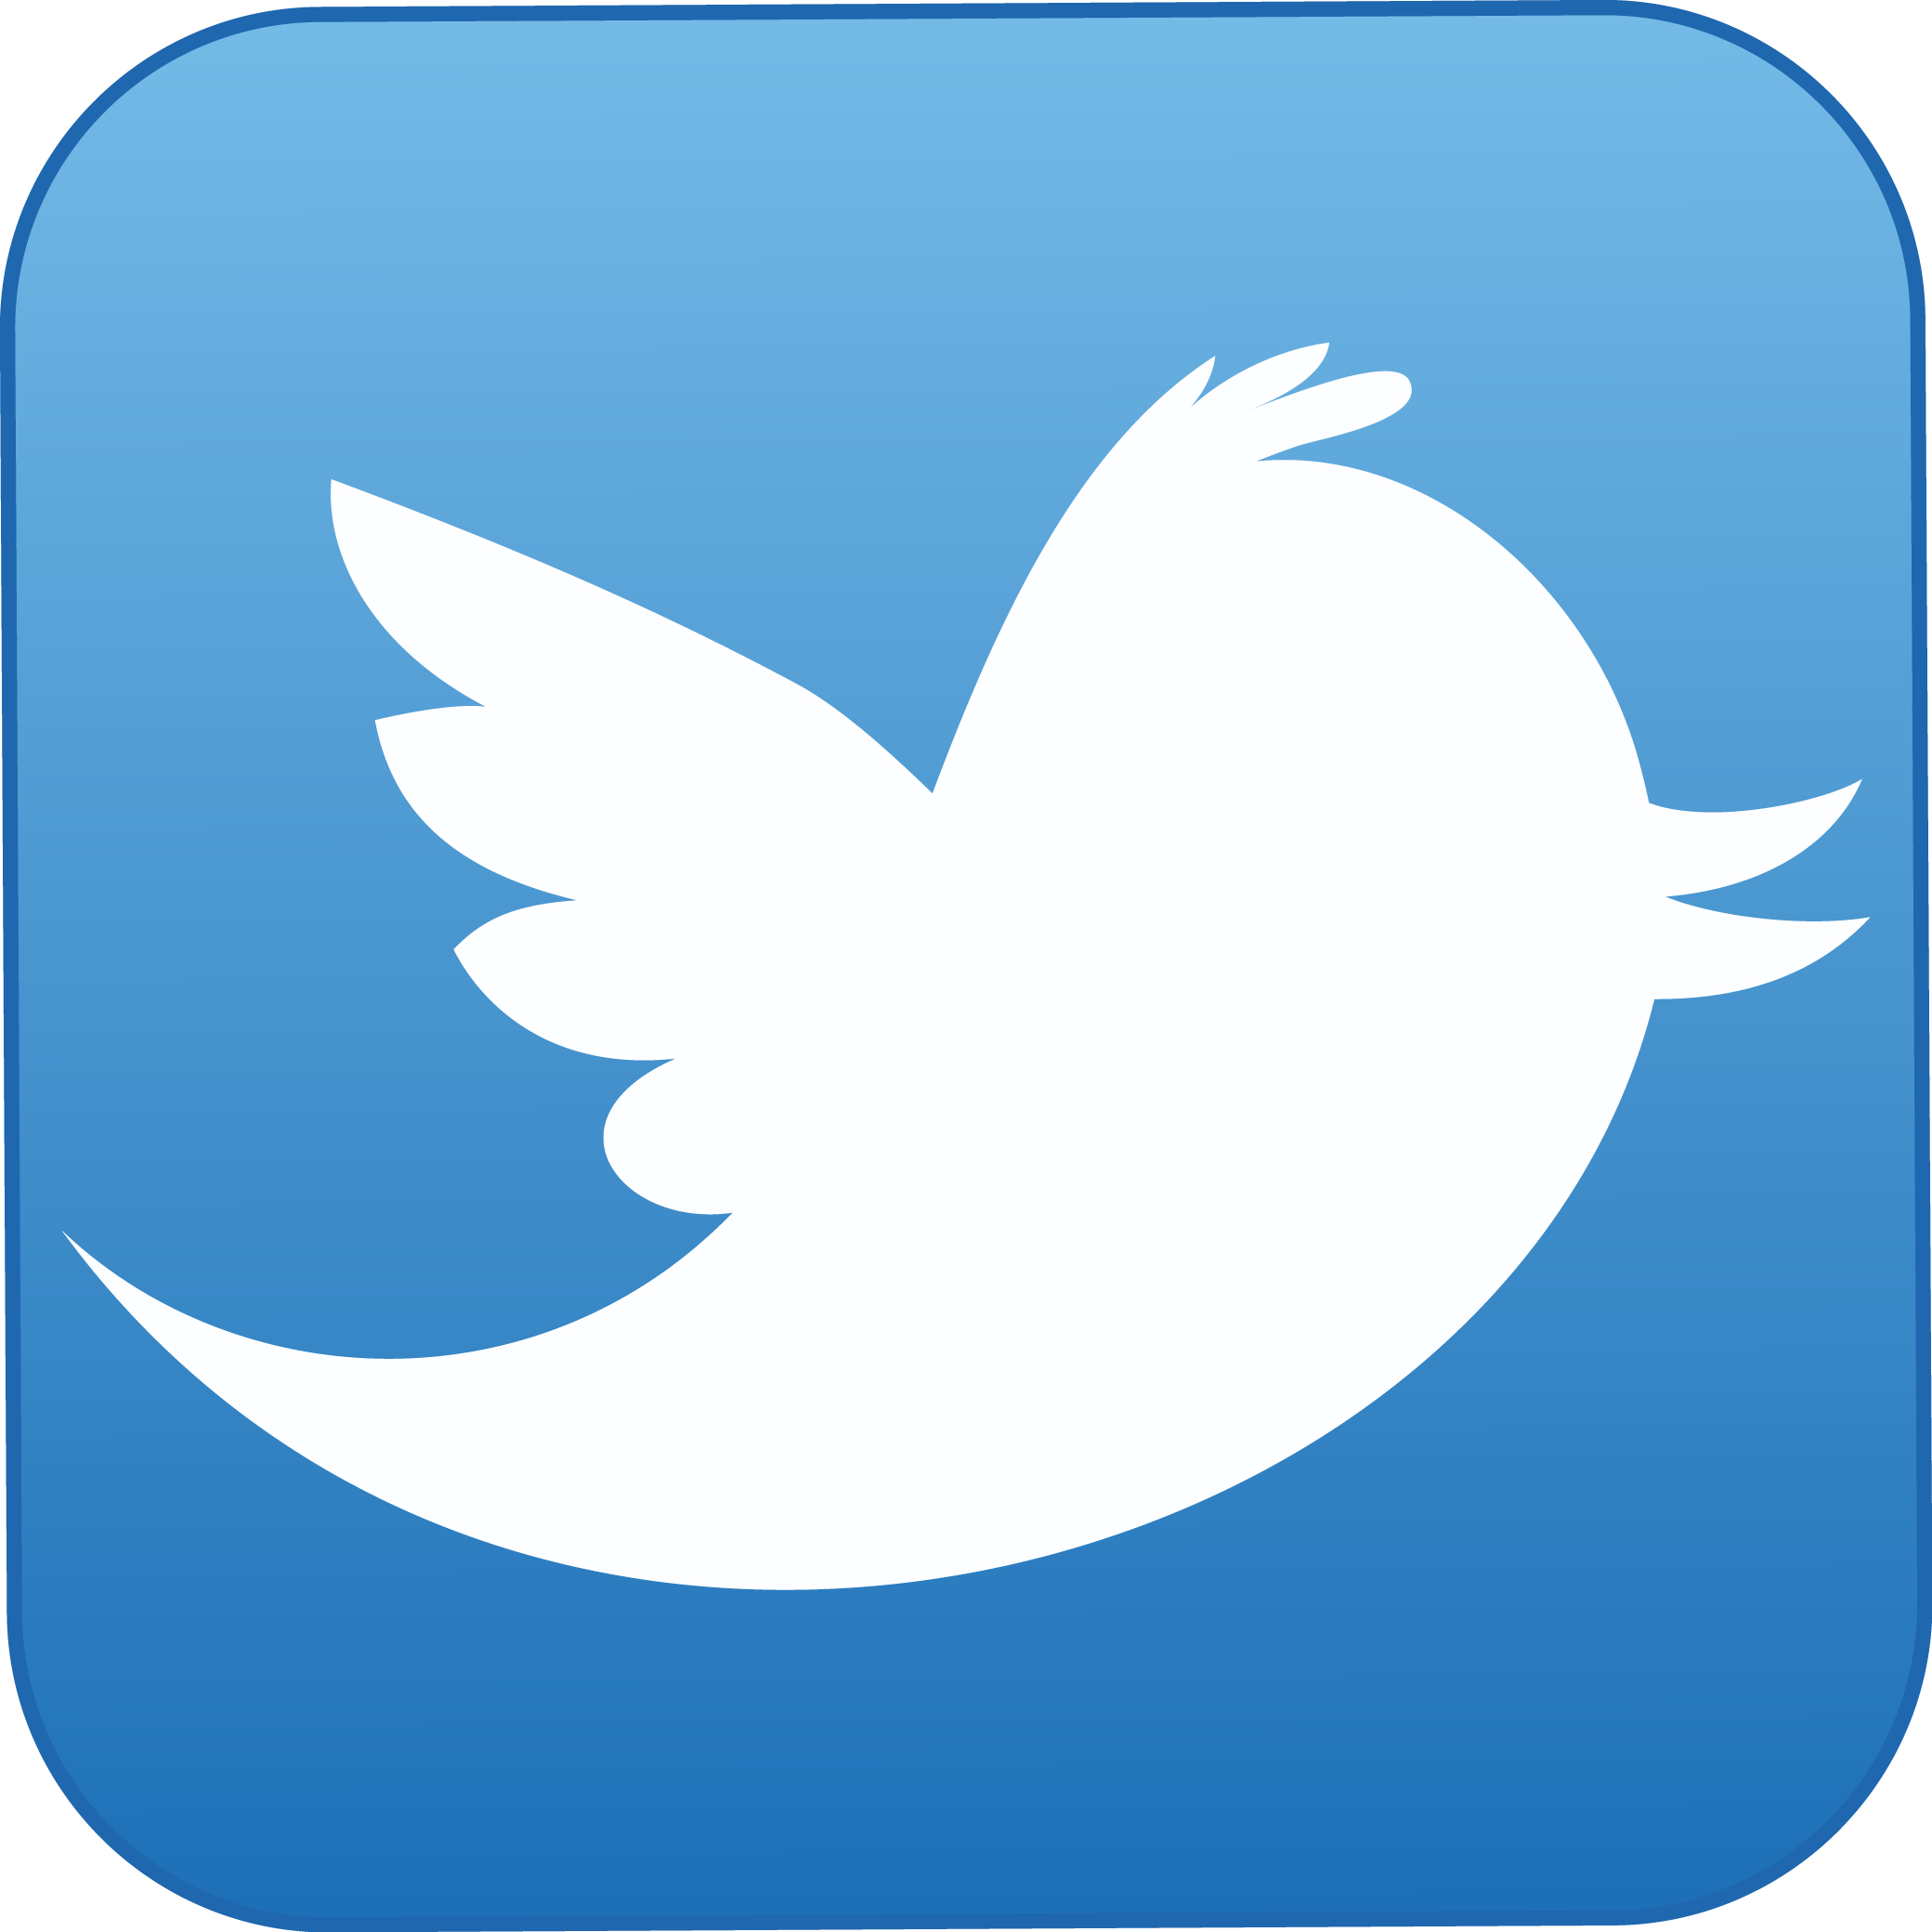 Twitter logo PNG images free download.